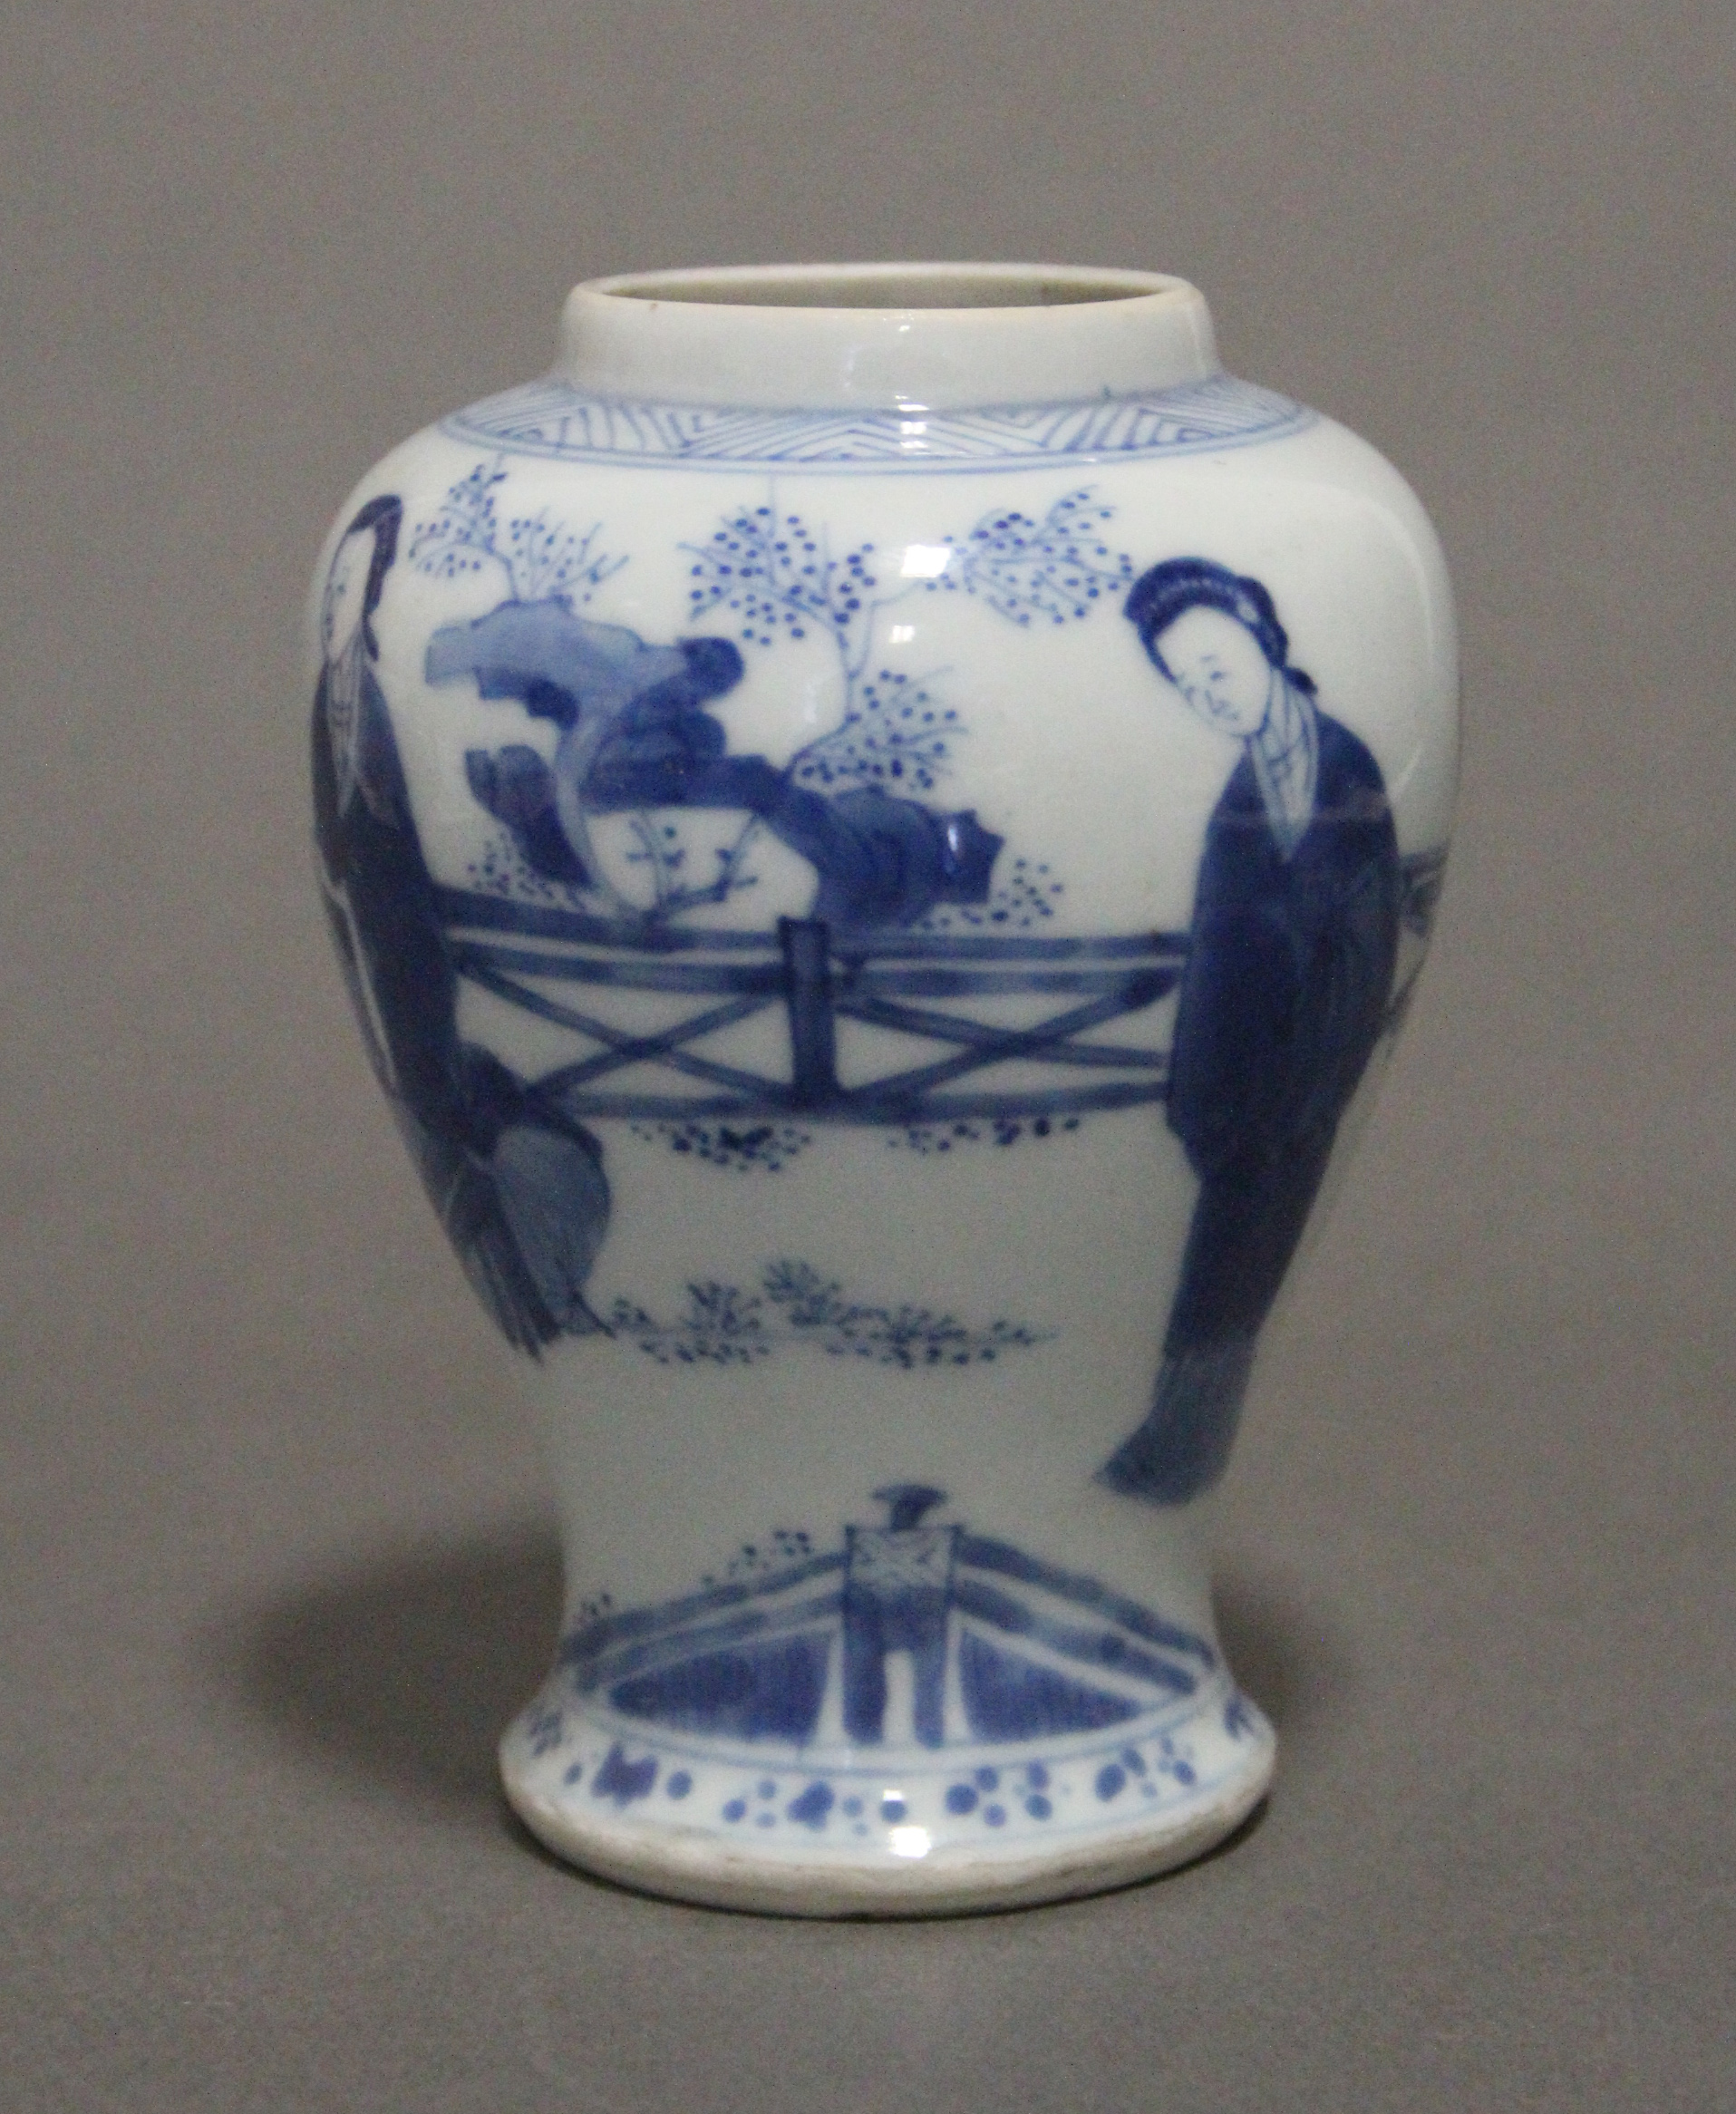 A Chinese Kangxi period blue & white porcelain small baluster vase painted with ladies in a formal